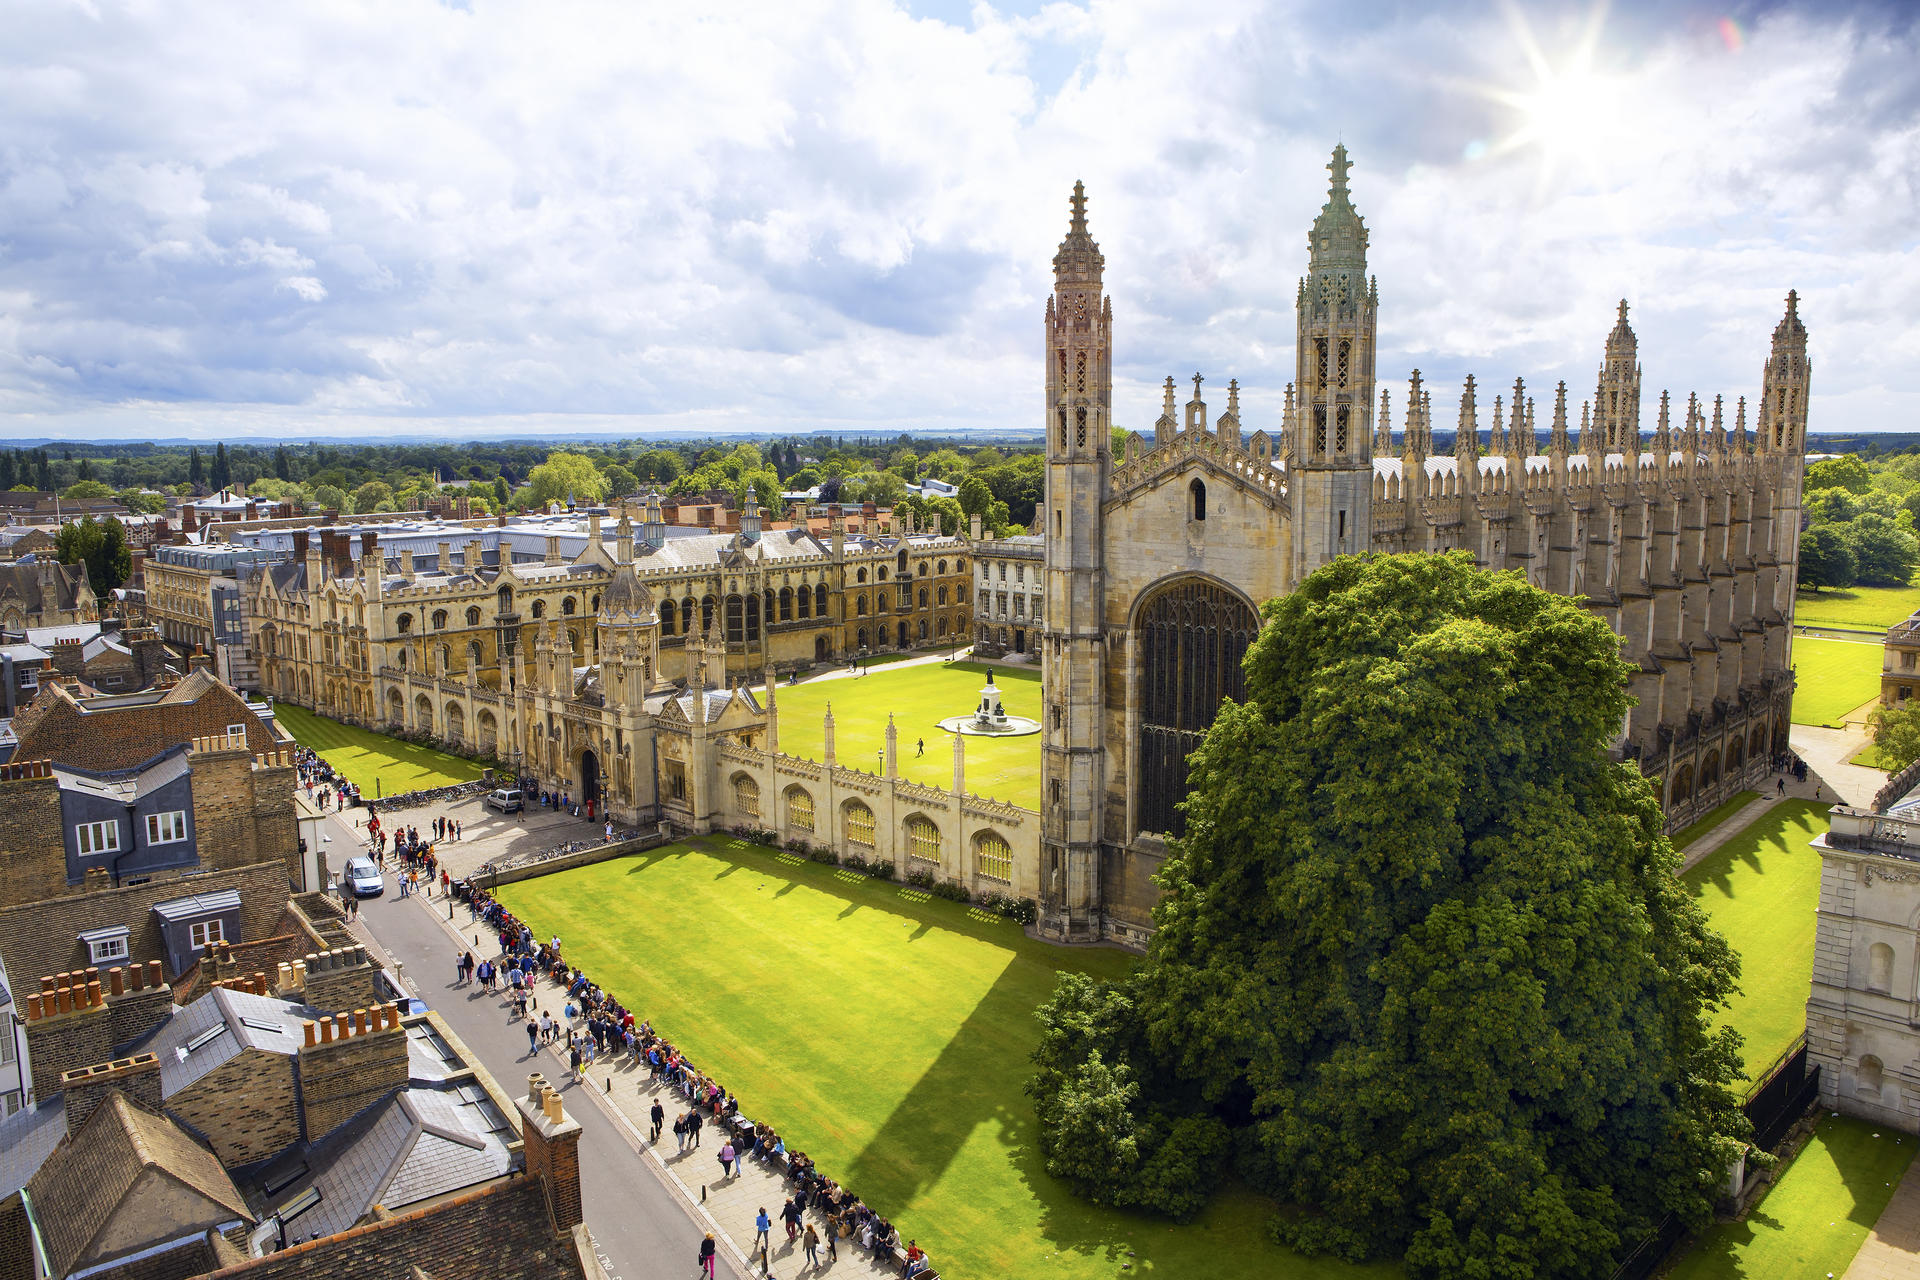 King's College at Cambridge University is one of the most favoured destinations for many students in Britain.